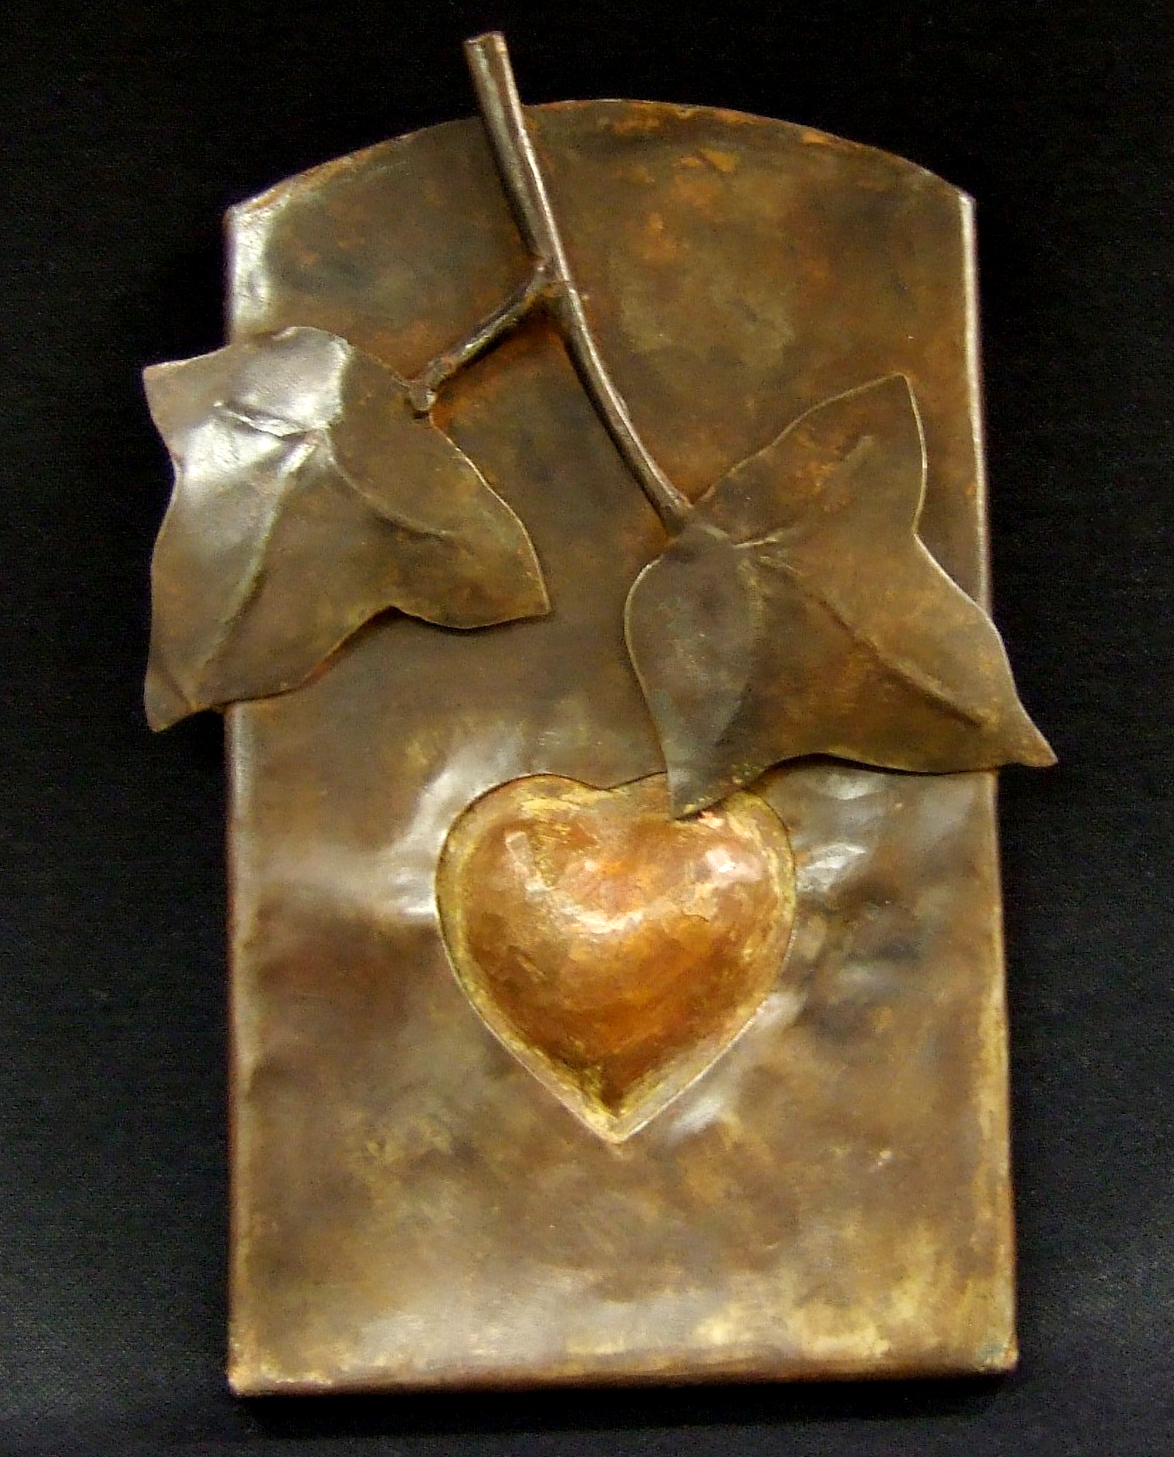 “Heart of Mary” by Paul Gregory Canfield (1991) was created from welded steel and copper. 